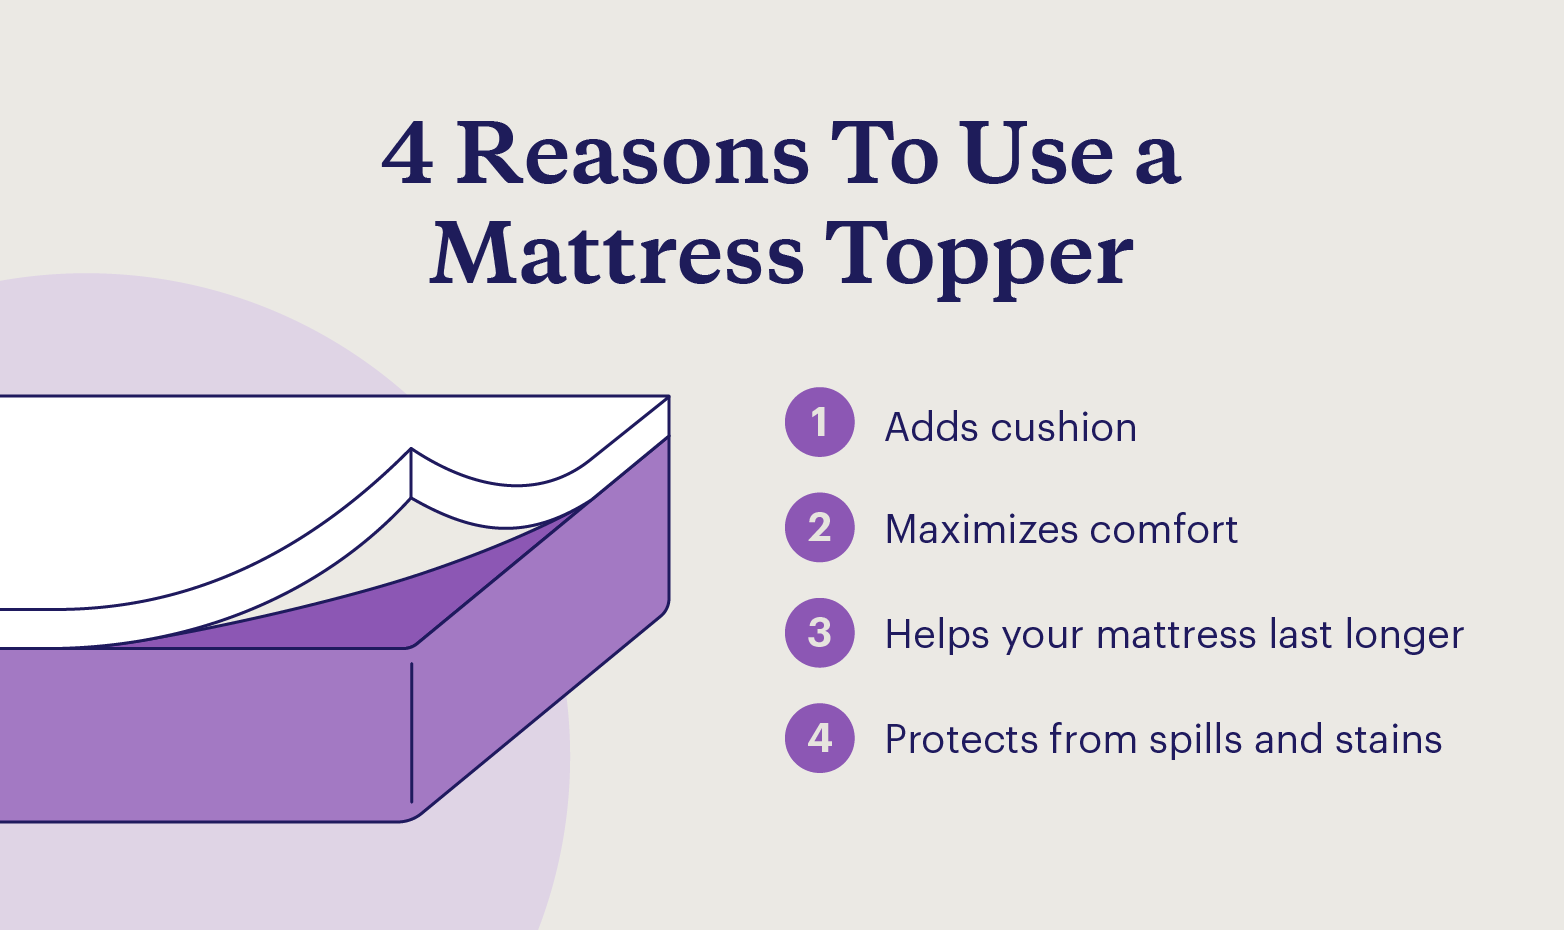 Graphic showing four reasons to use a mattress topper with an illustration of a mattress topper.